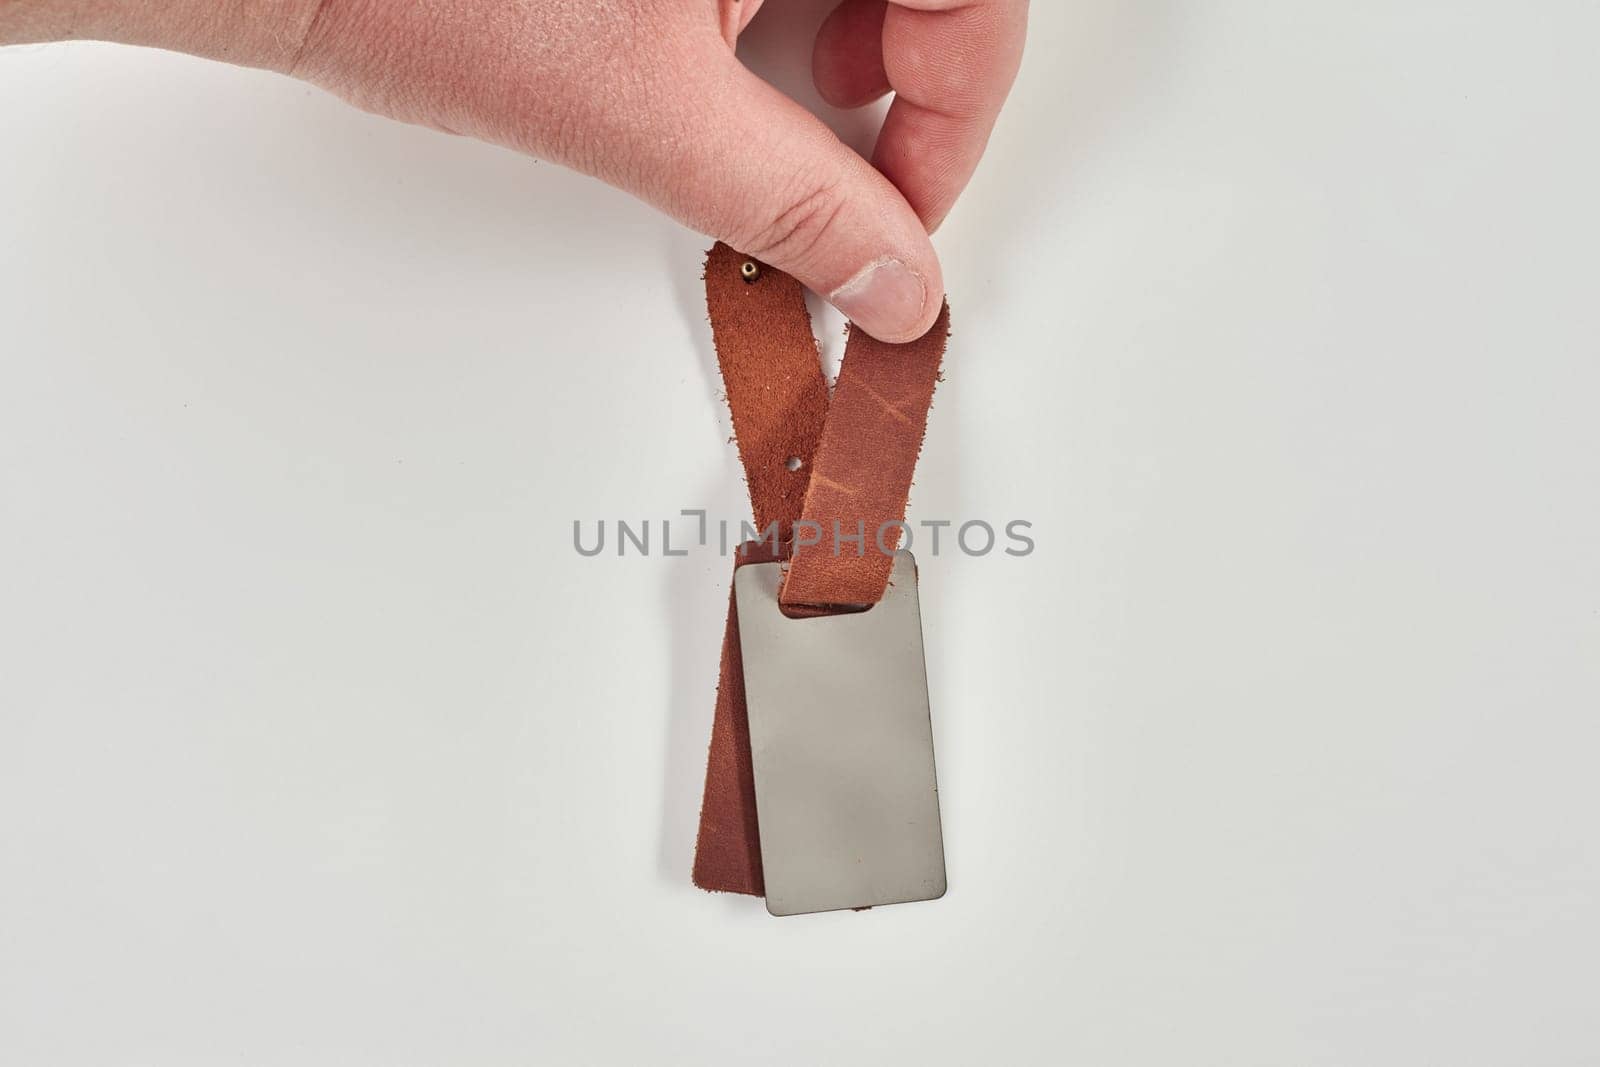 Male hand presenting unmarked brown leather keychain designed for photo imprinting or custom engraving, against light backdrop with copyspace. Stylish handcrafted accessories